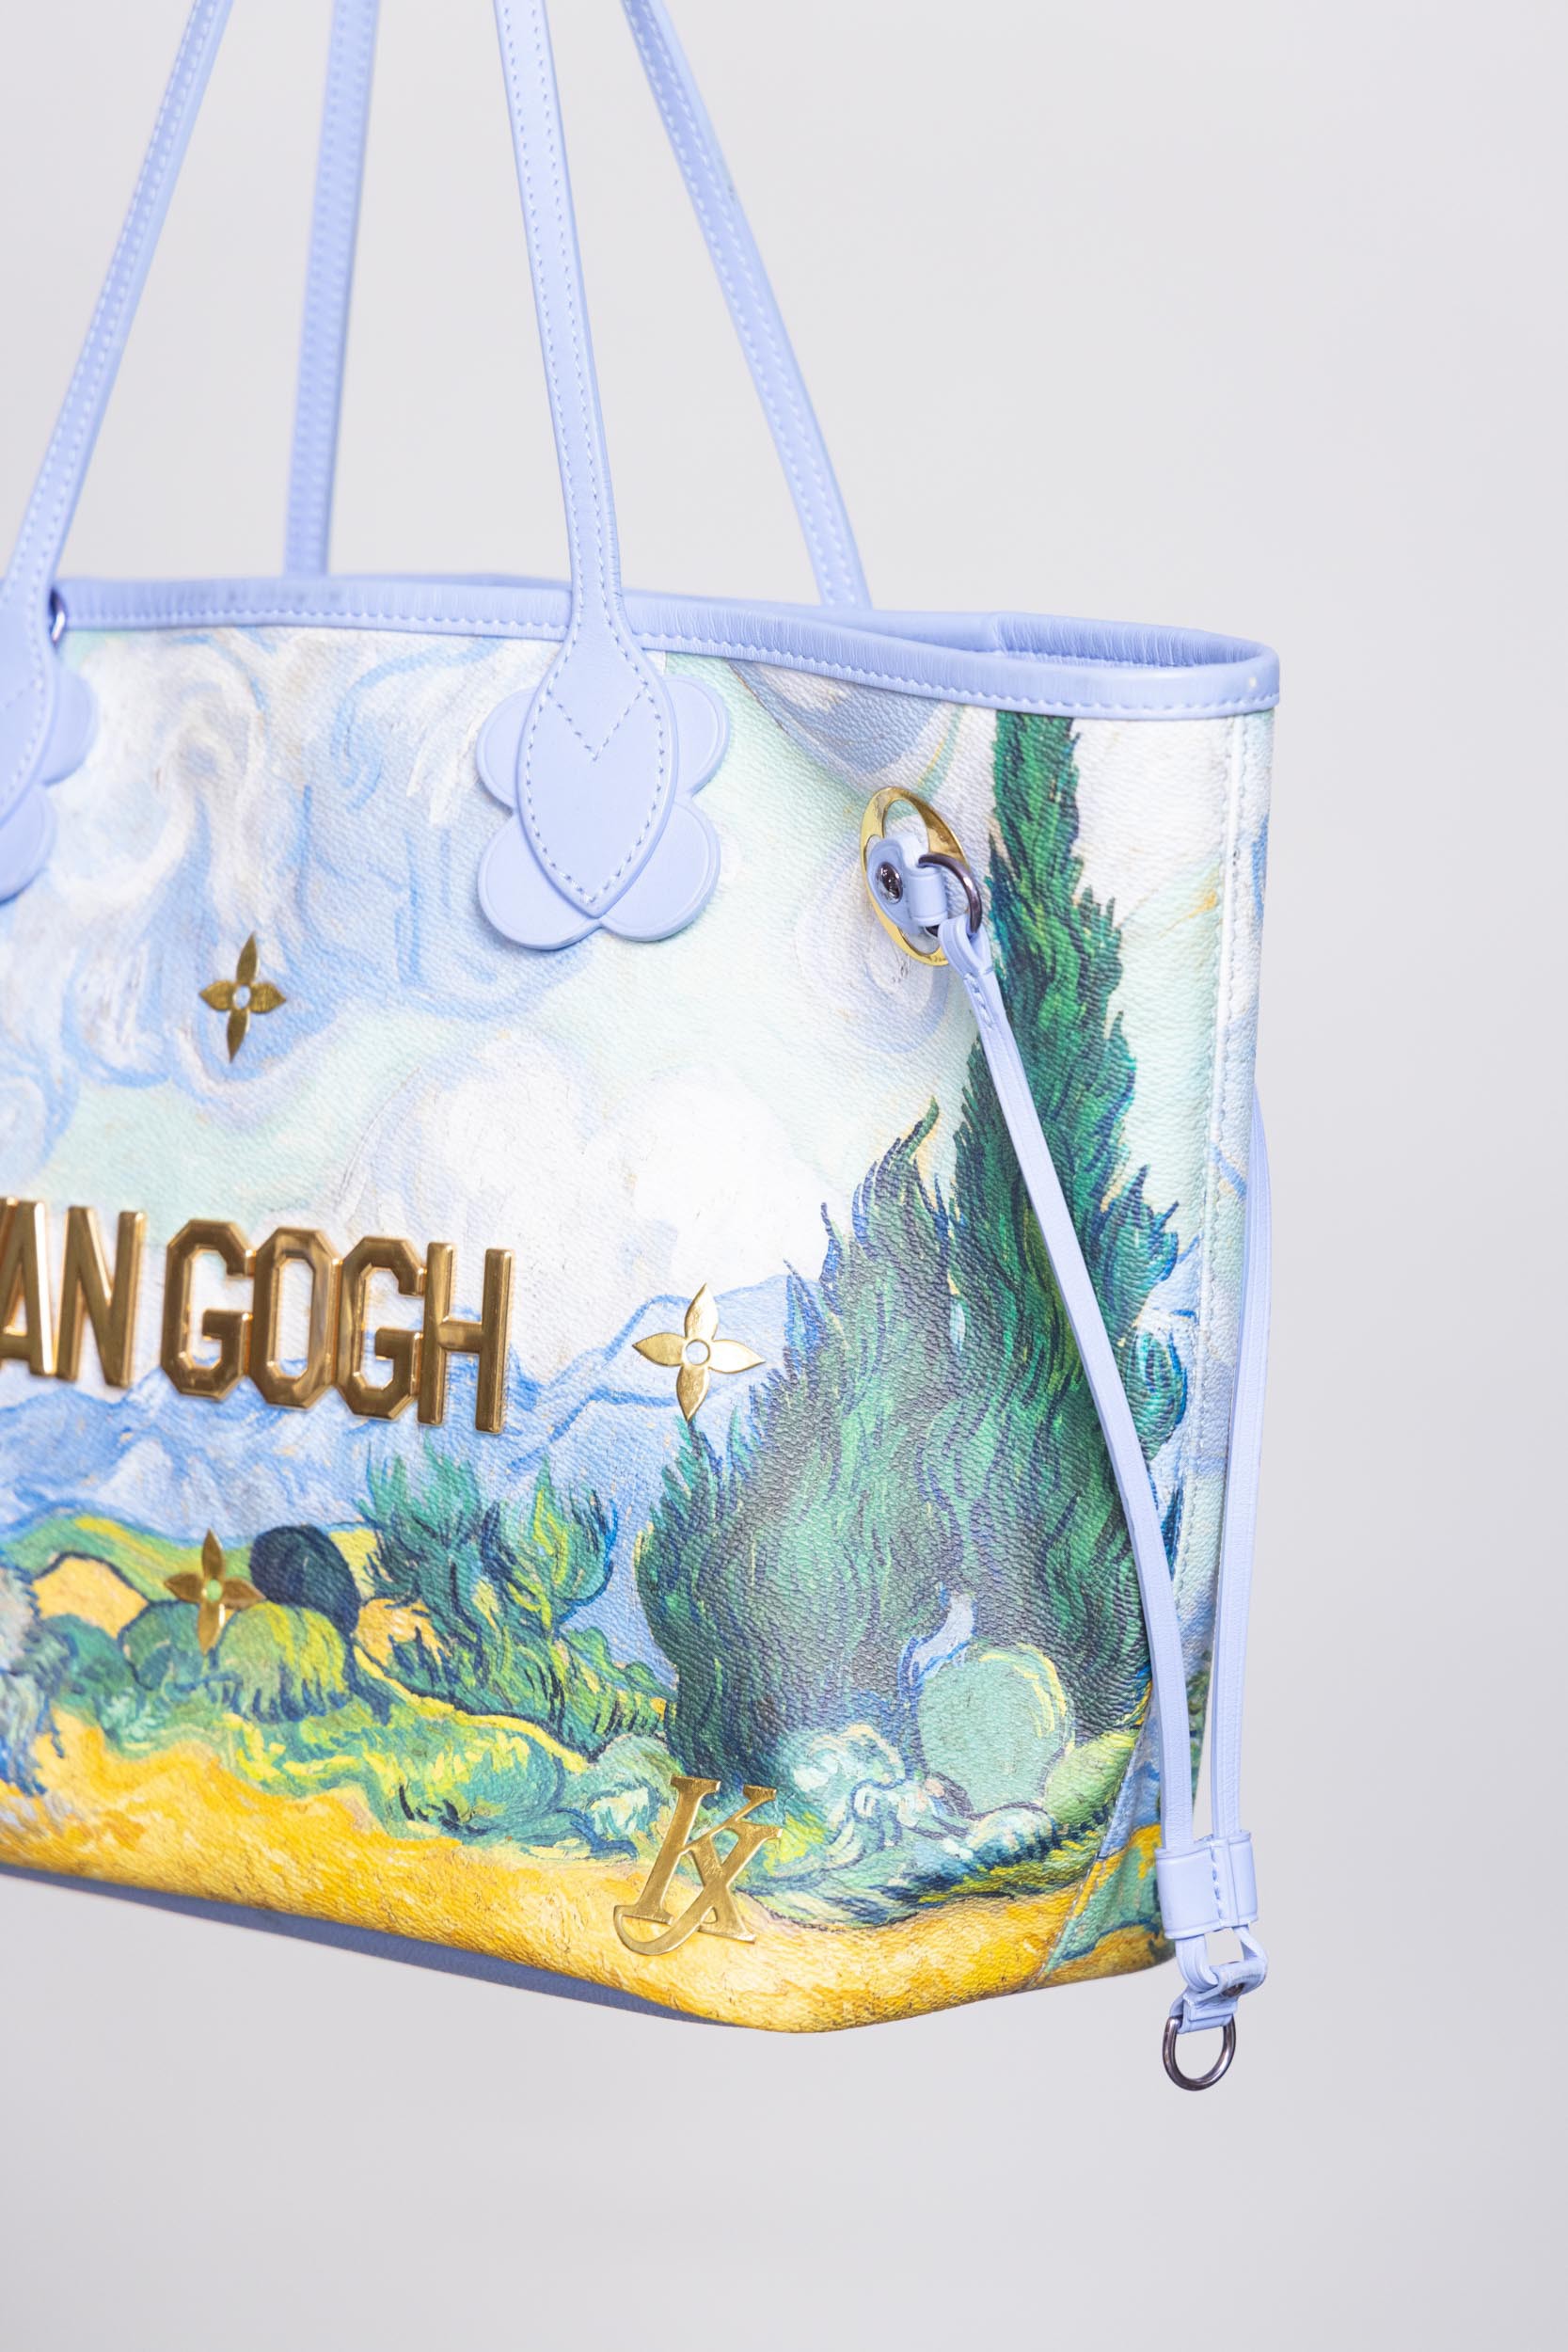 LOUIS VUITTON Masters Neverfull MM Tote Bag Pouch M43331 Van Gogh Painting  Ex++ | eBay